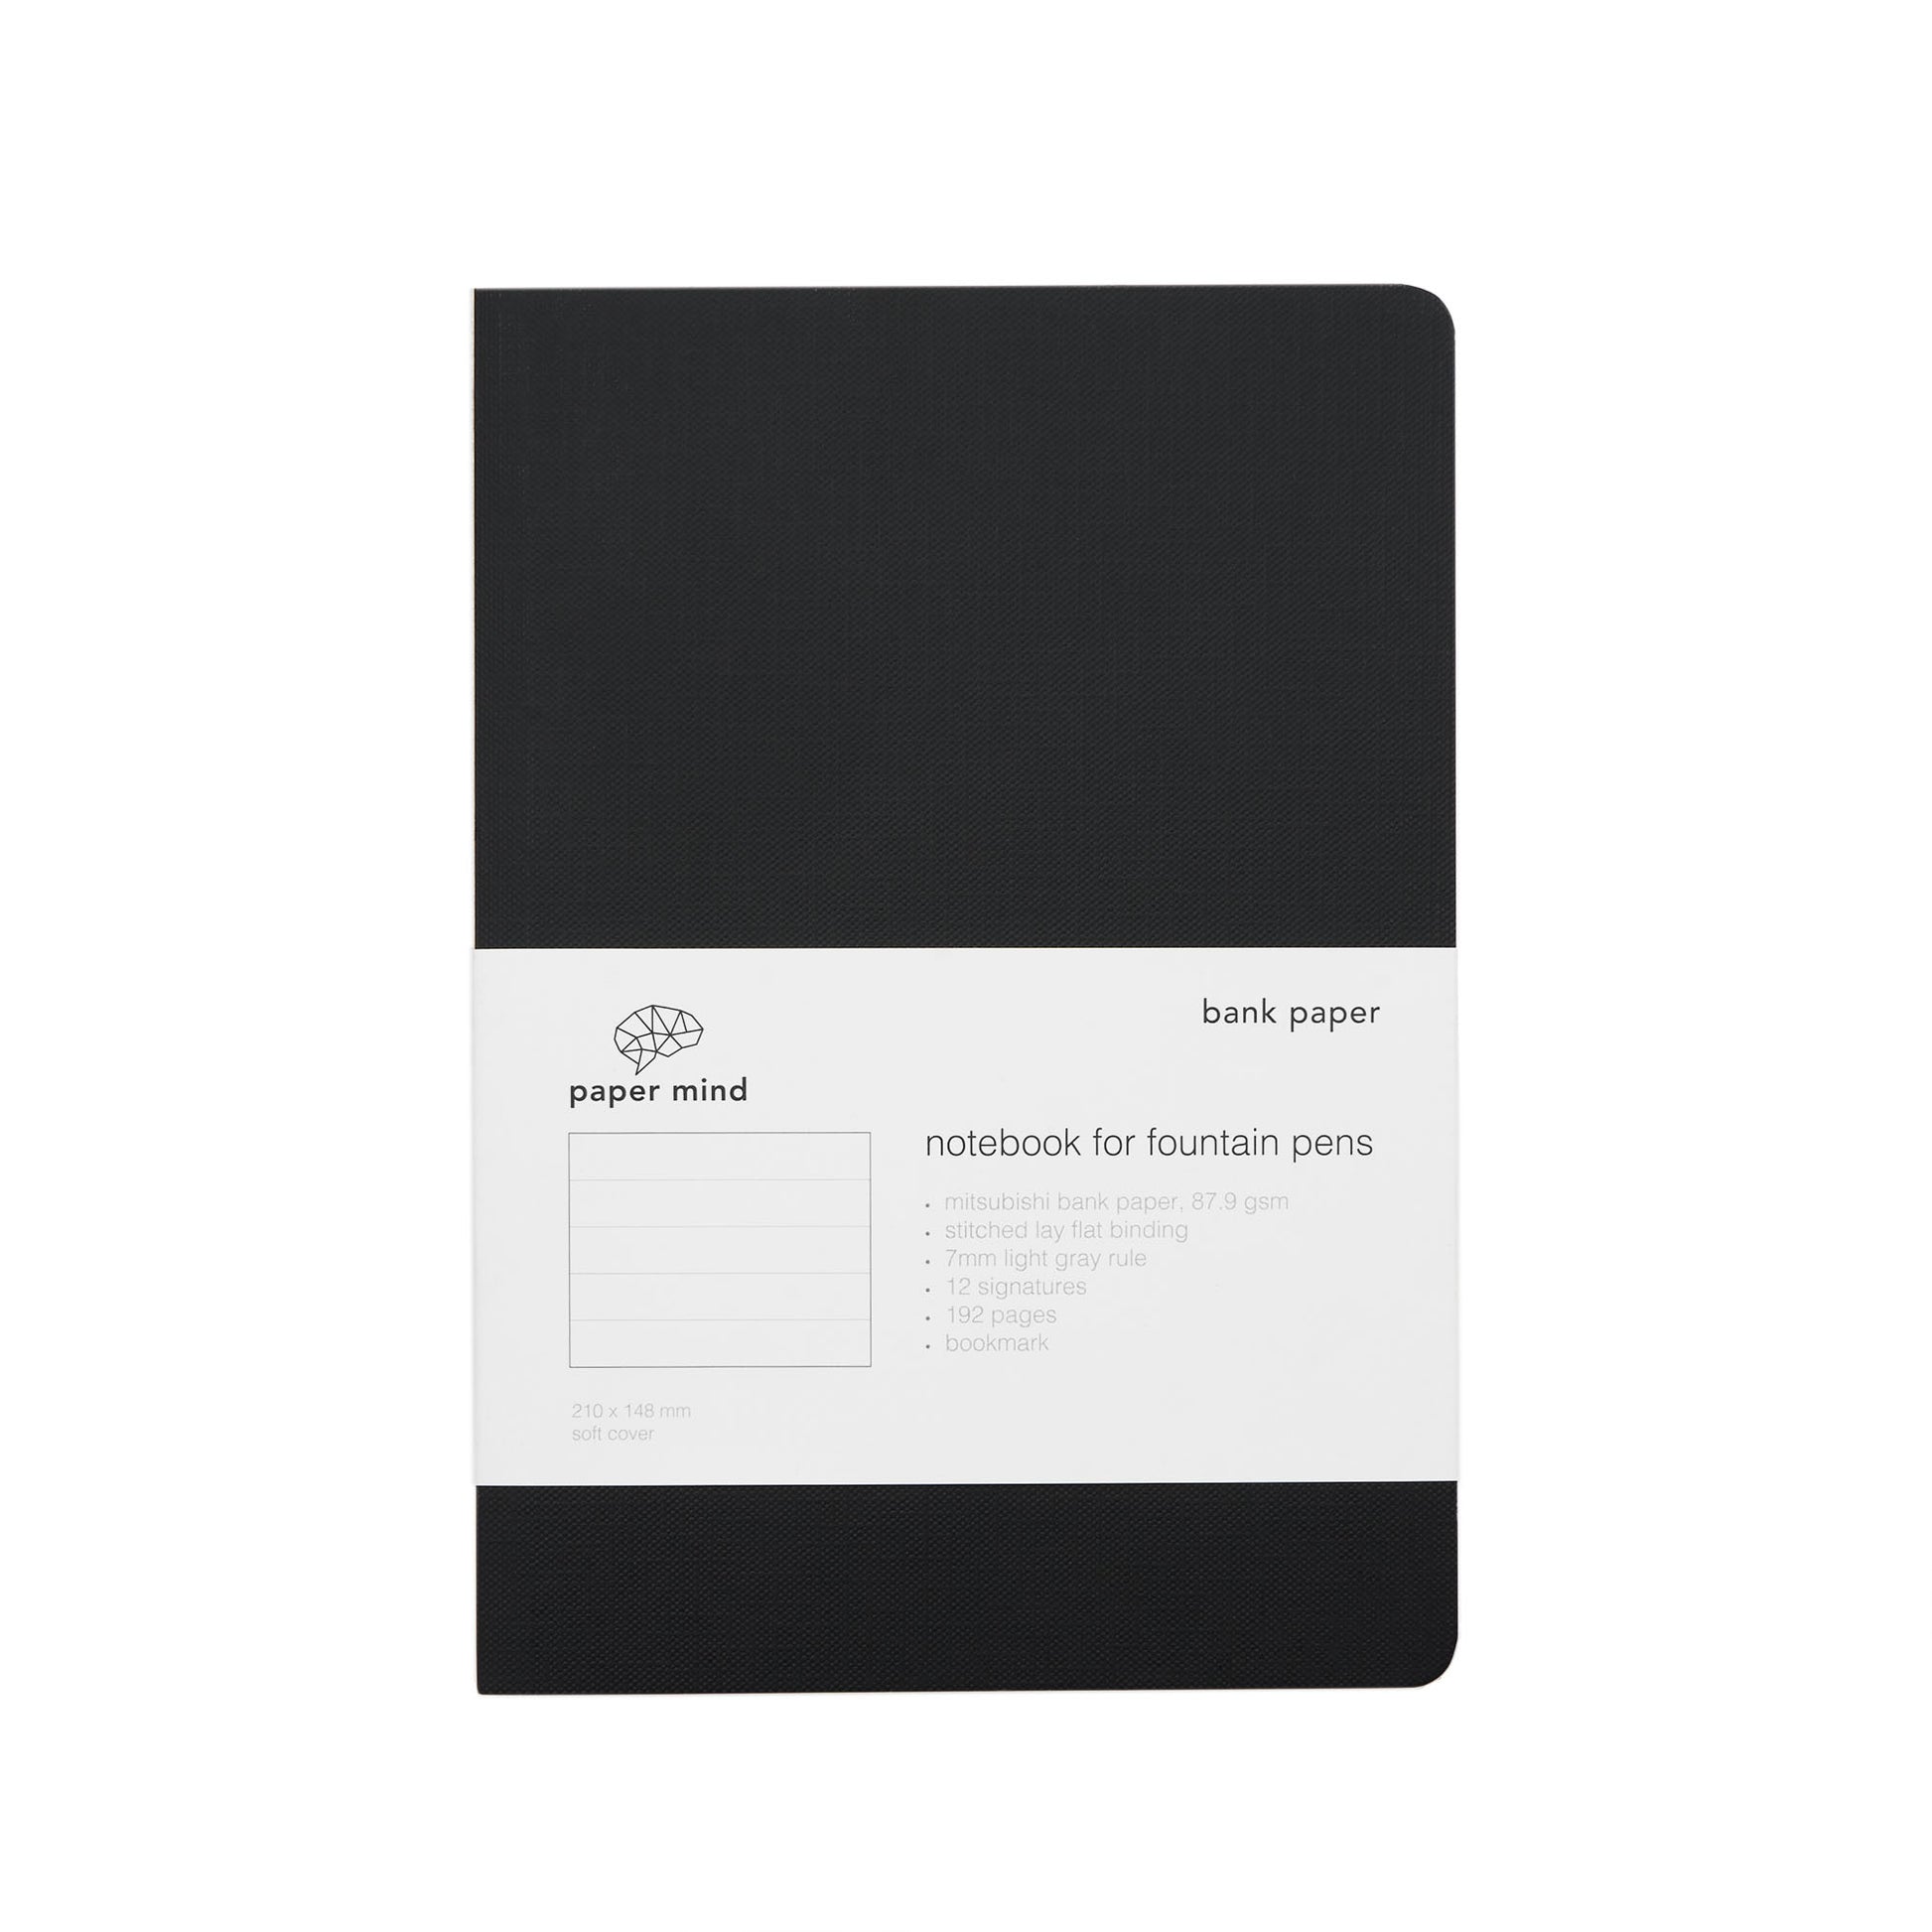 Mitsubishi Bank Paper Notebook  Notebook for Fountain Pens – The